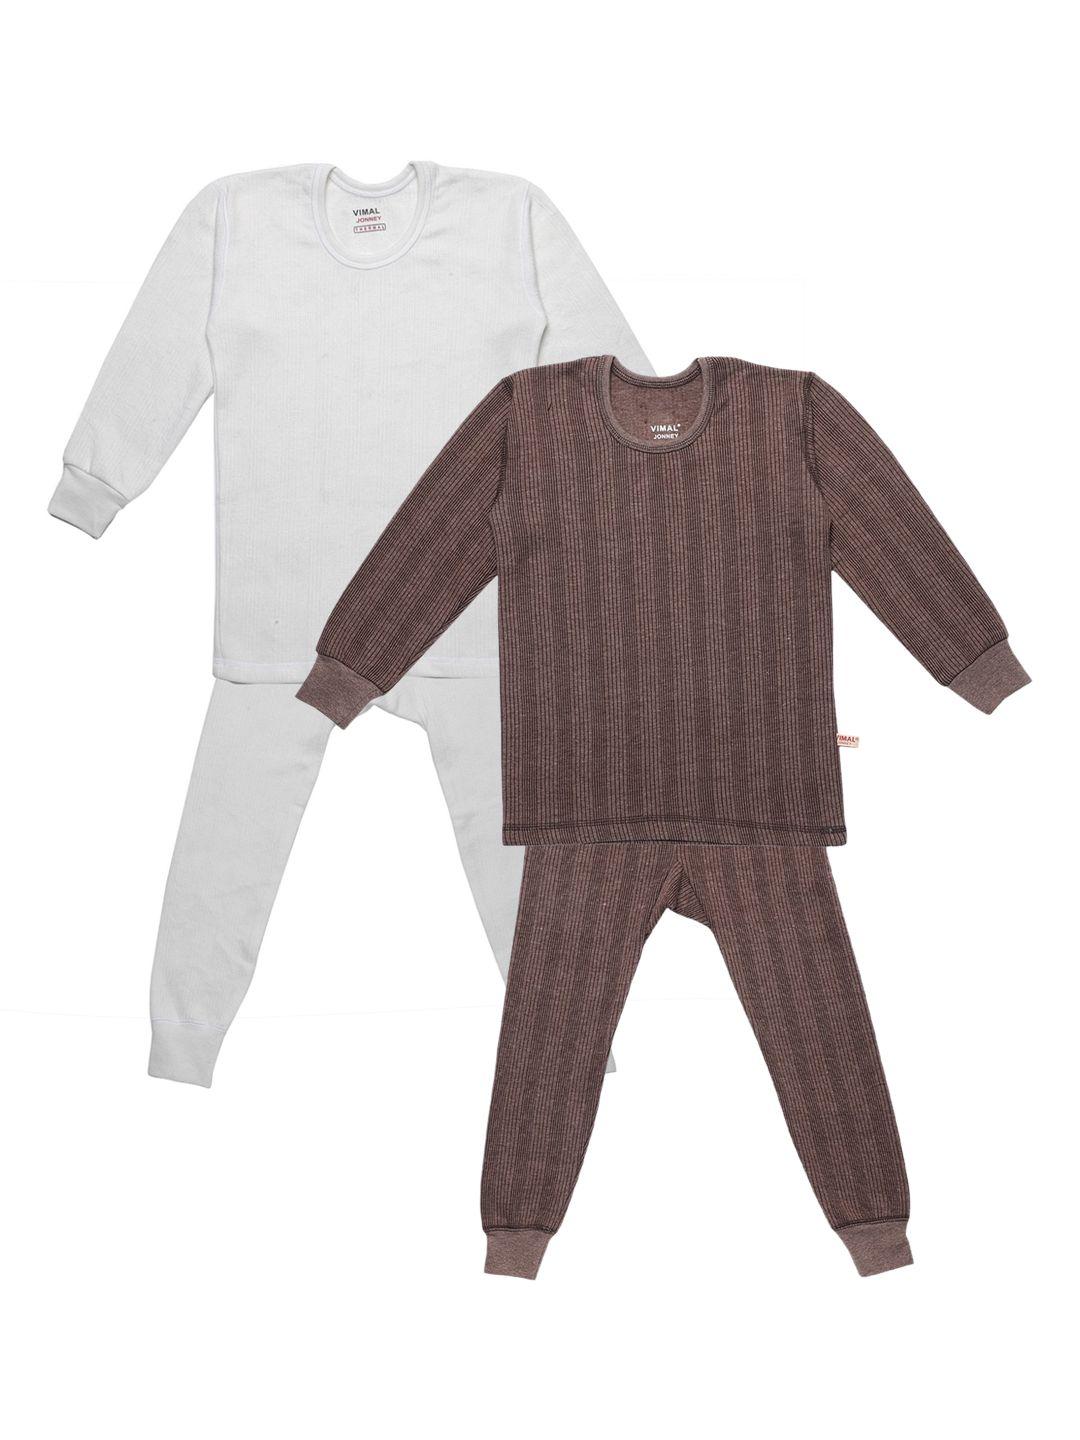 vimal jonney kids pack of 2 striped thermal top and bottom set